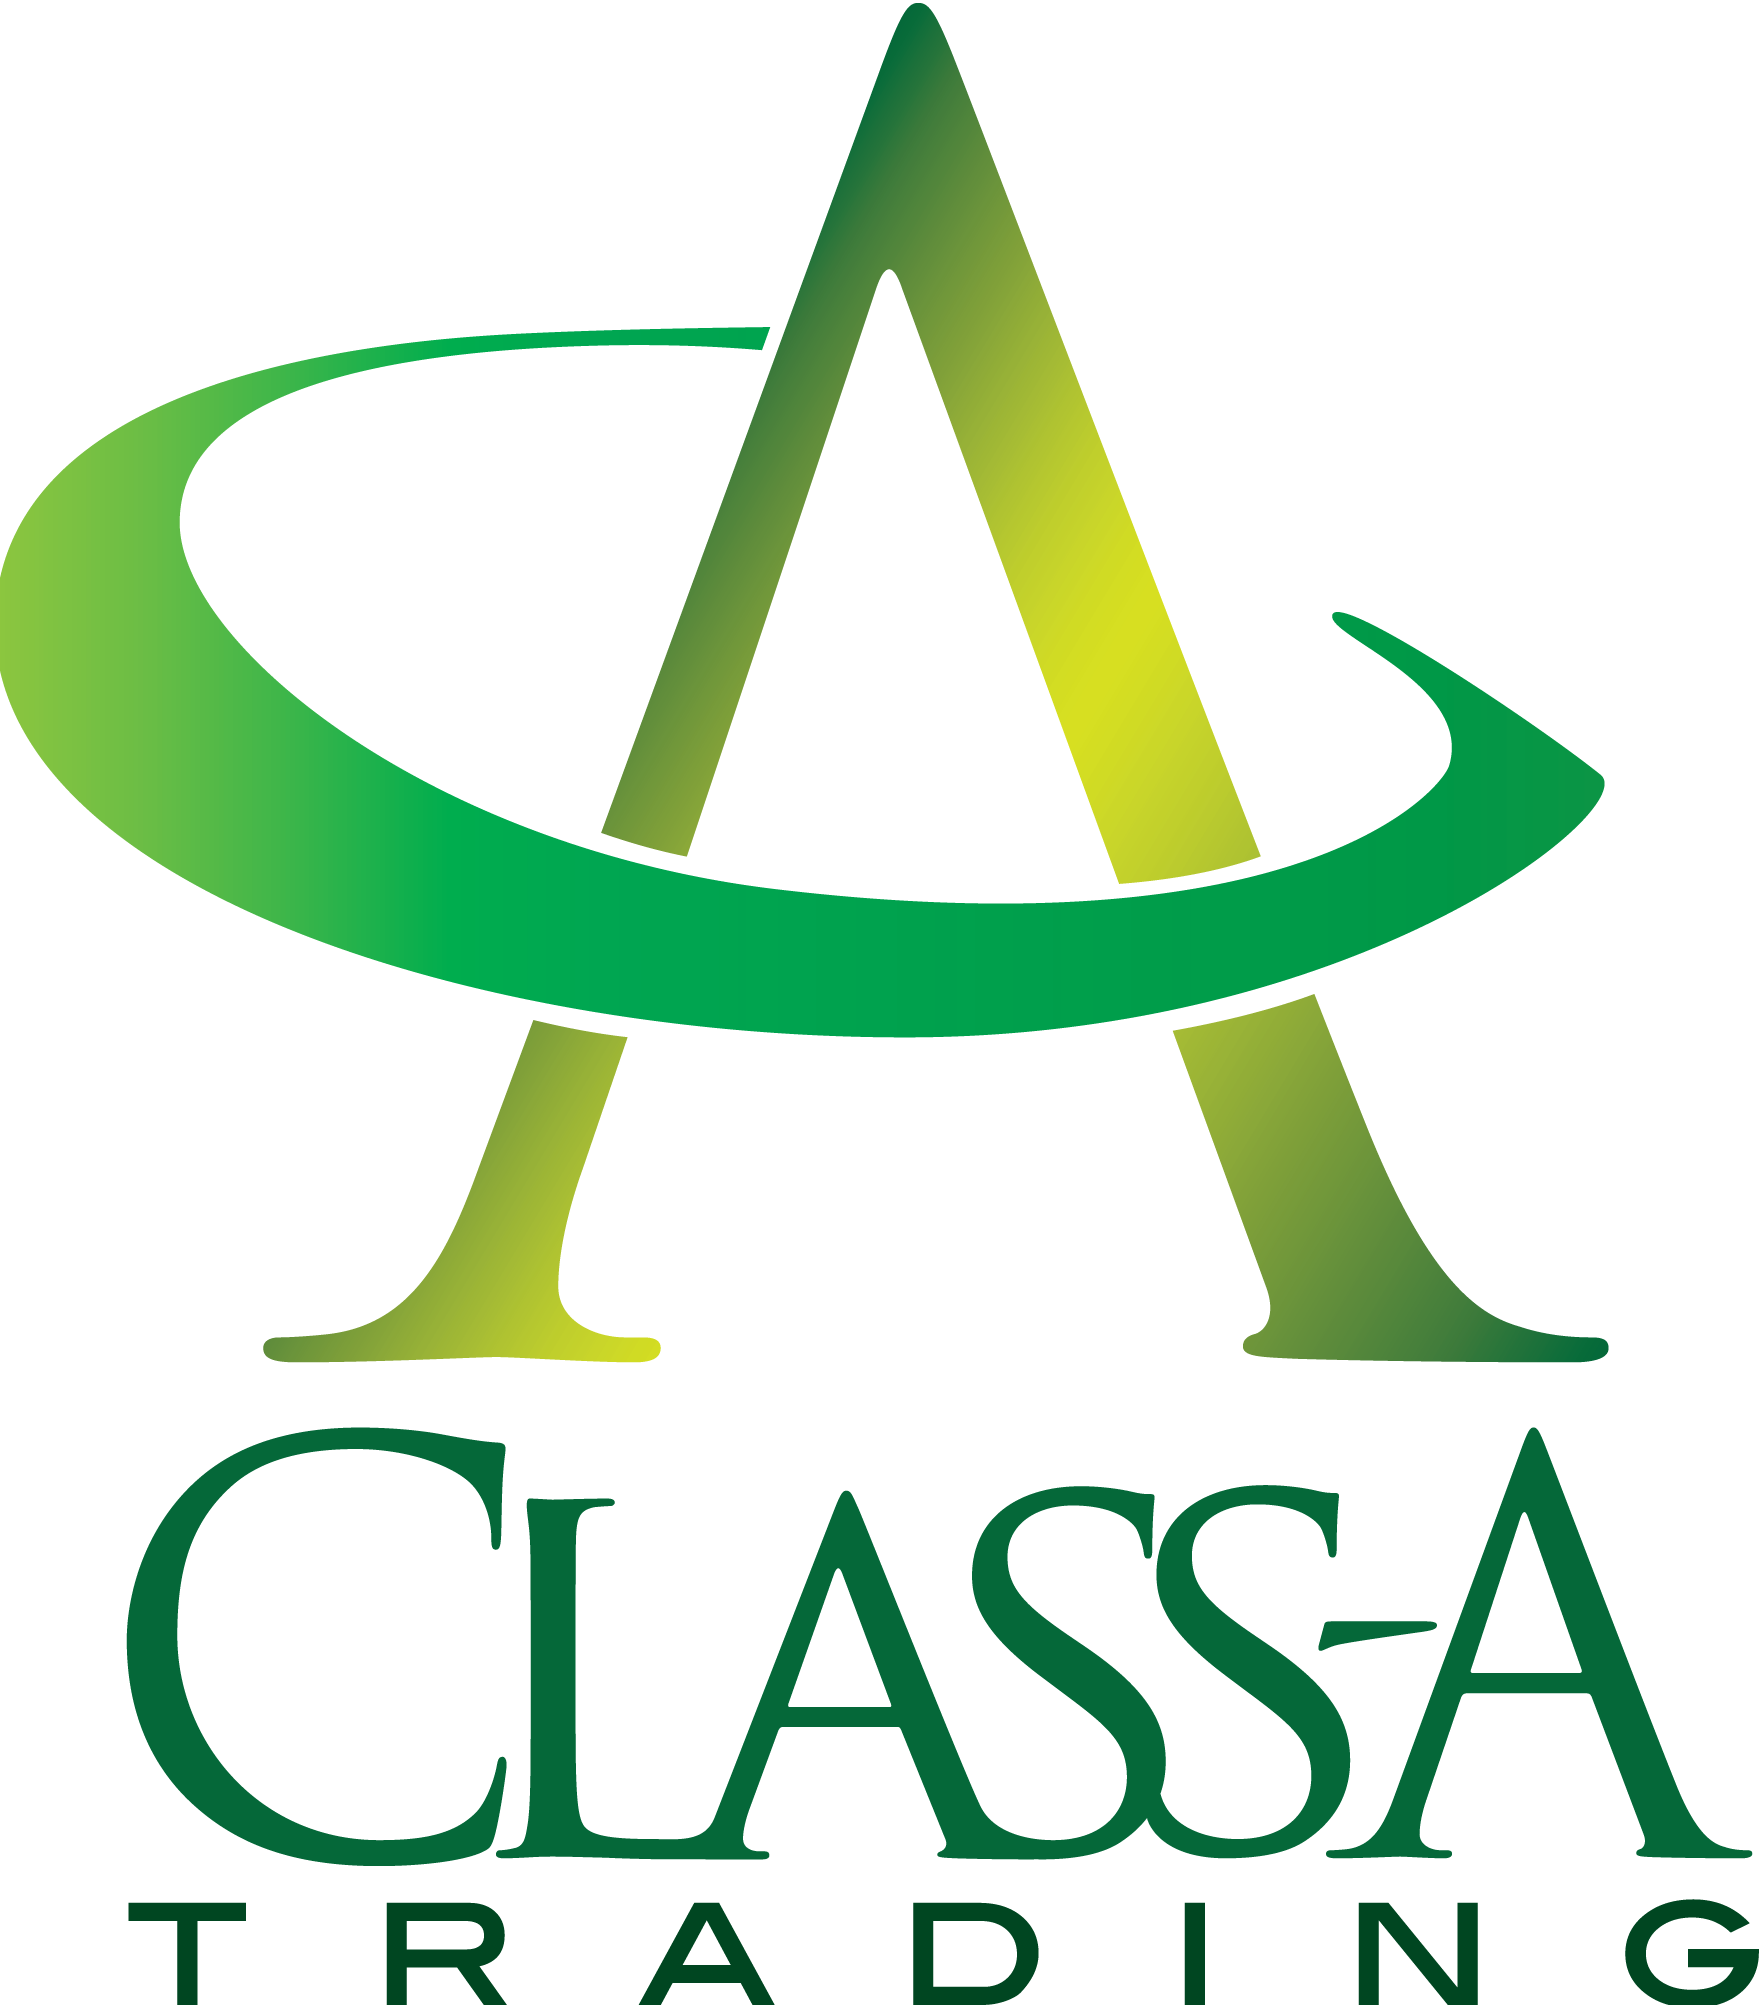 CLASS-A Trading